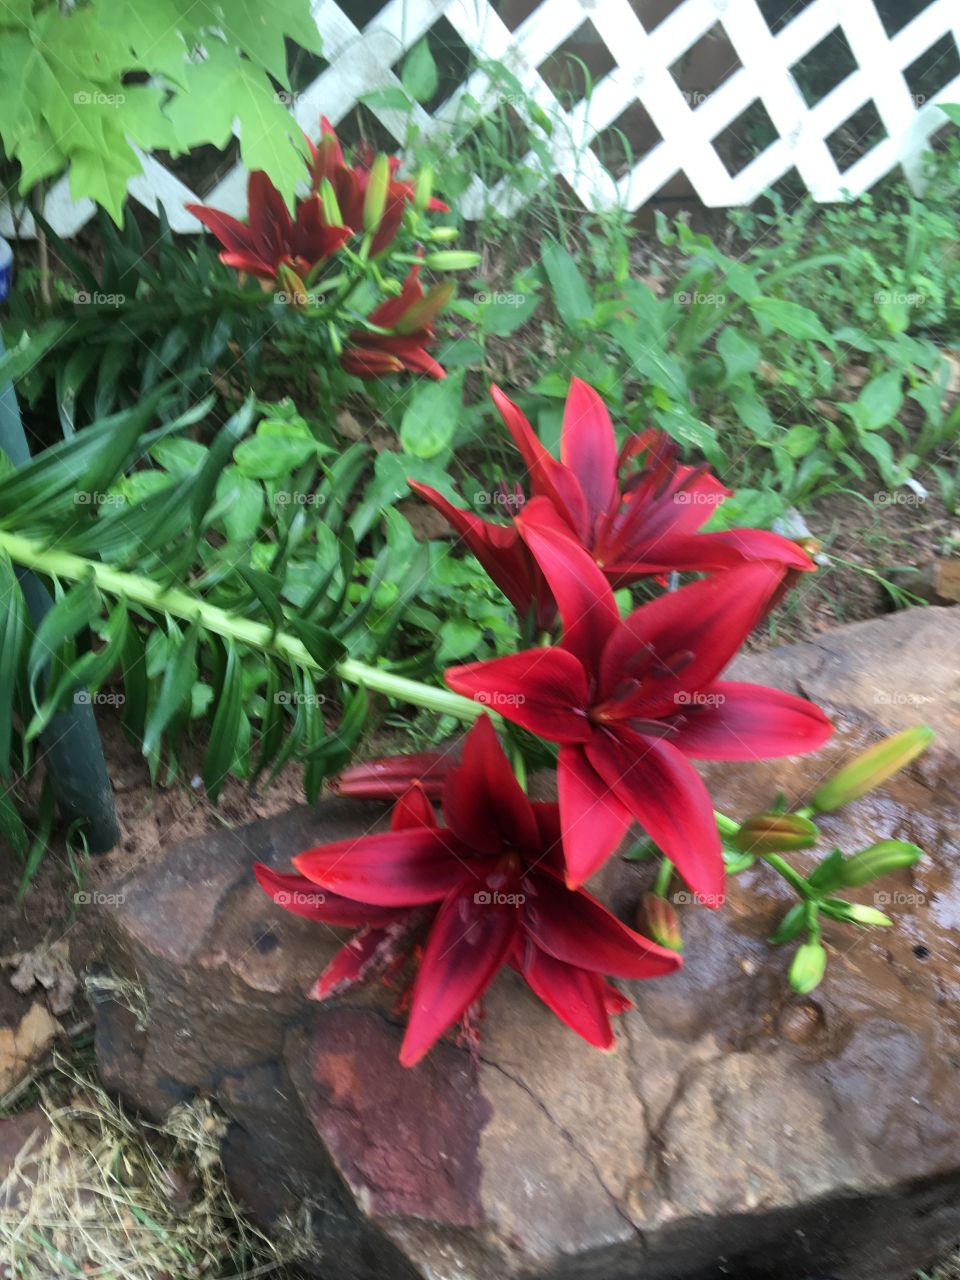 One of my flower gardens has the most beautiful color lilies deep red all bloomed.